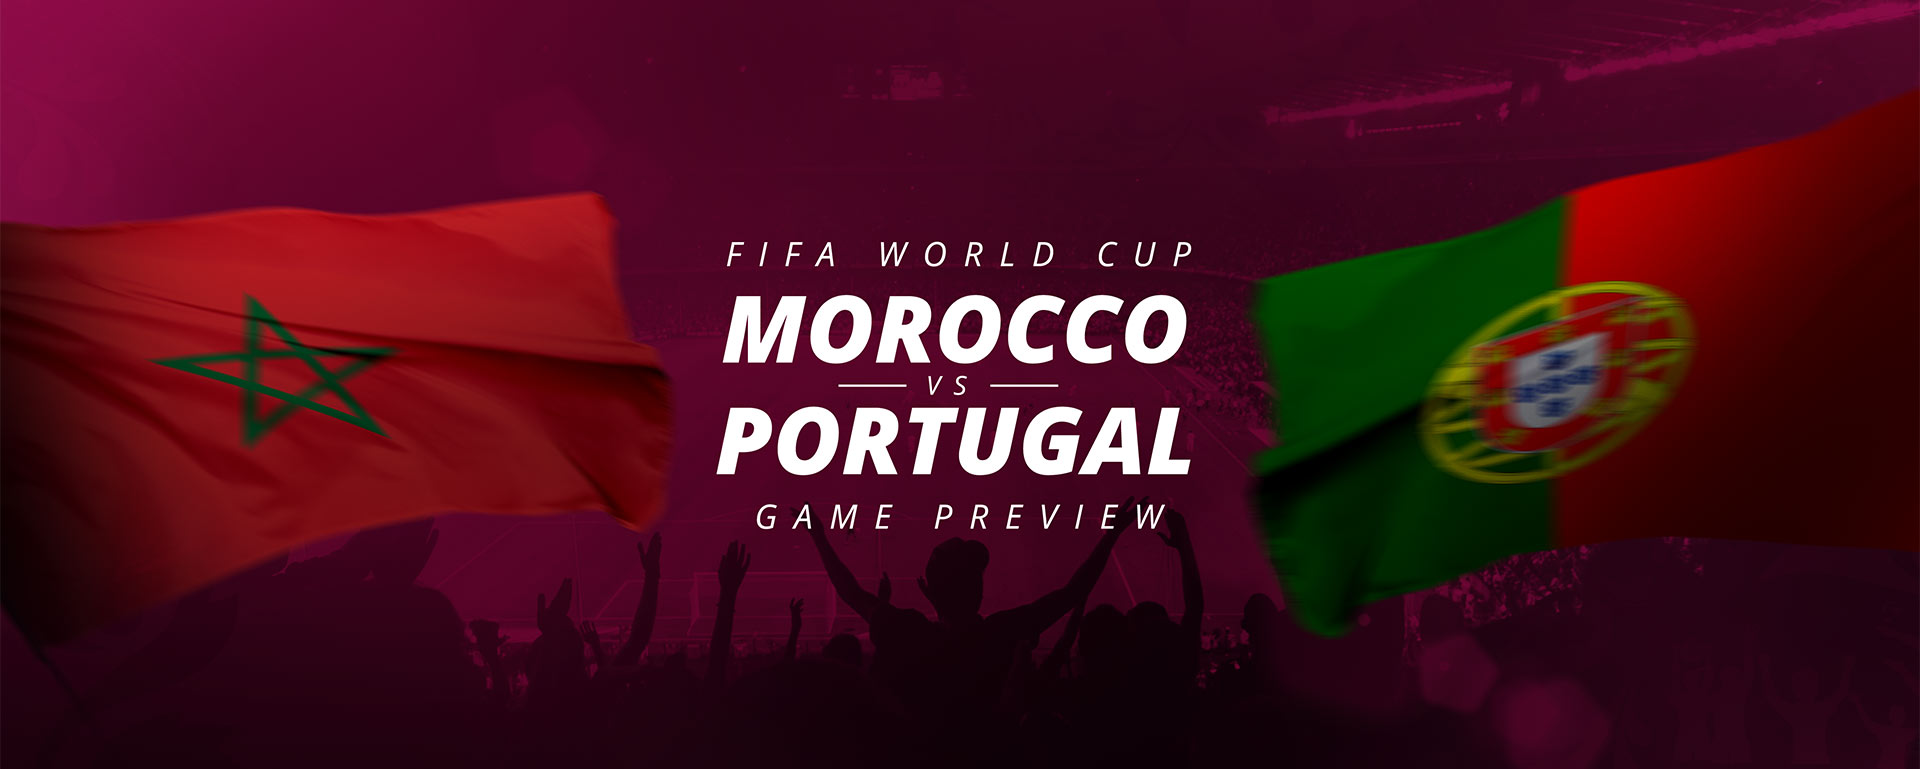 FIFA WORLD CUP: MOROCCO V PORTUGAL – GAME PREVIEW